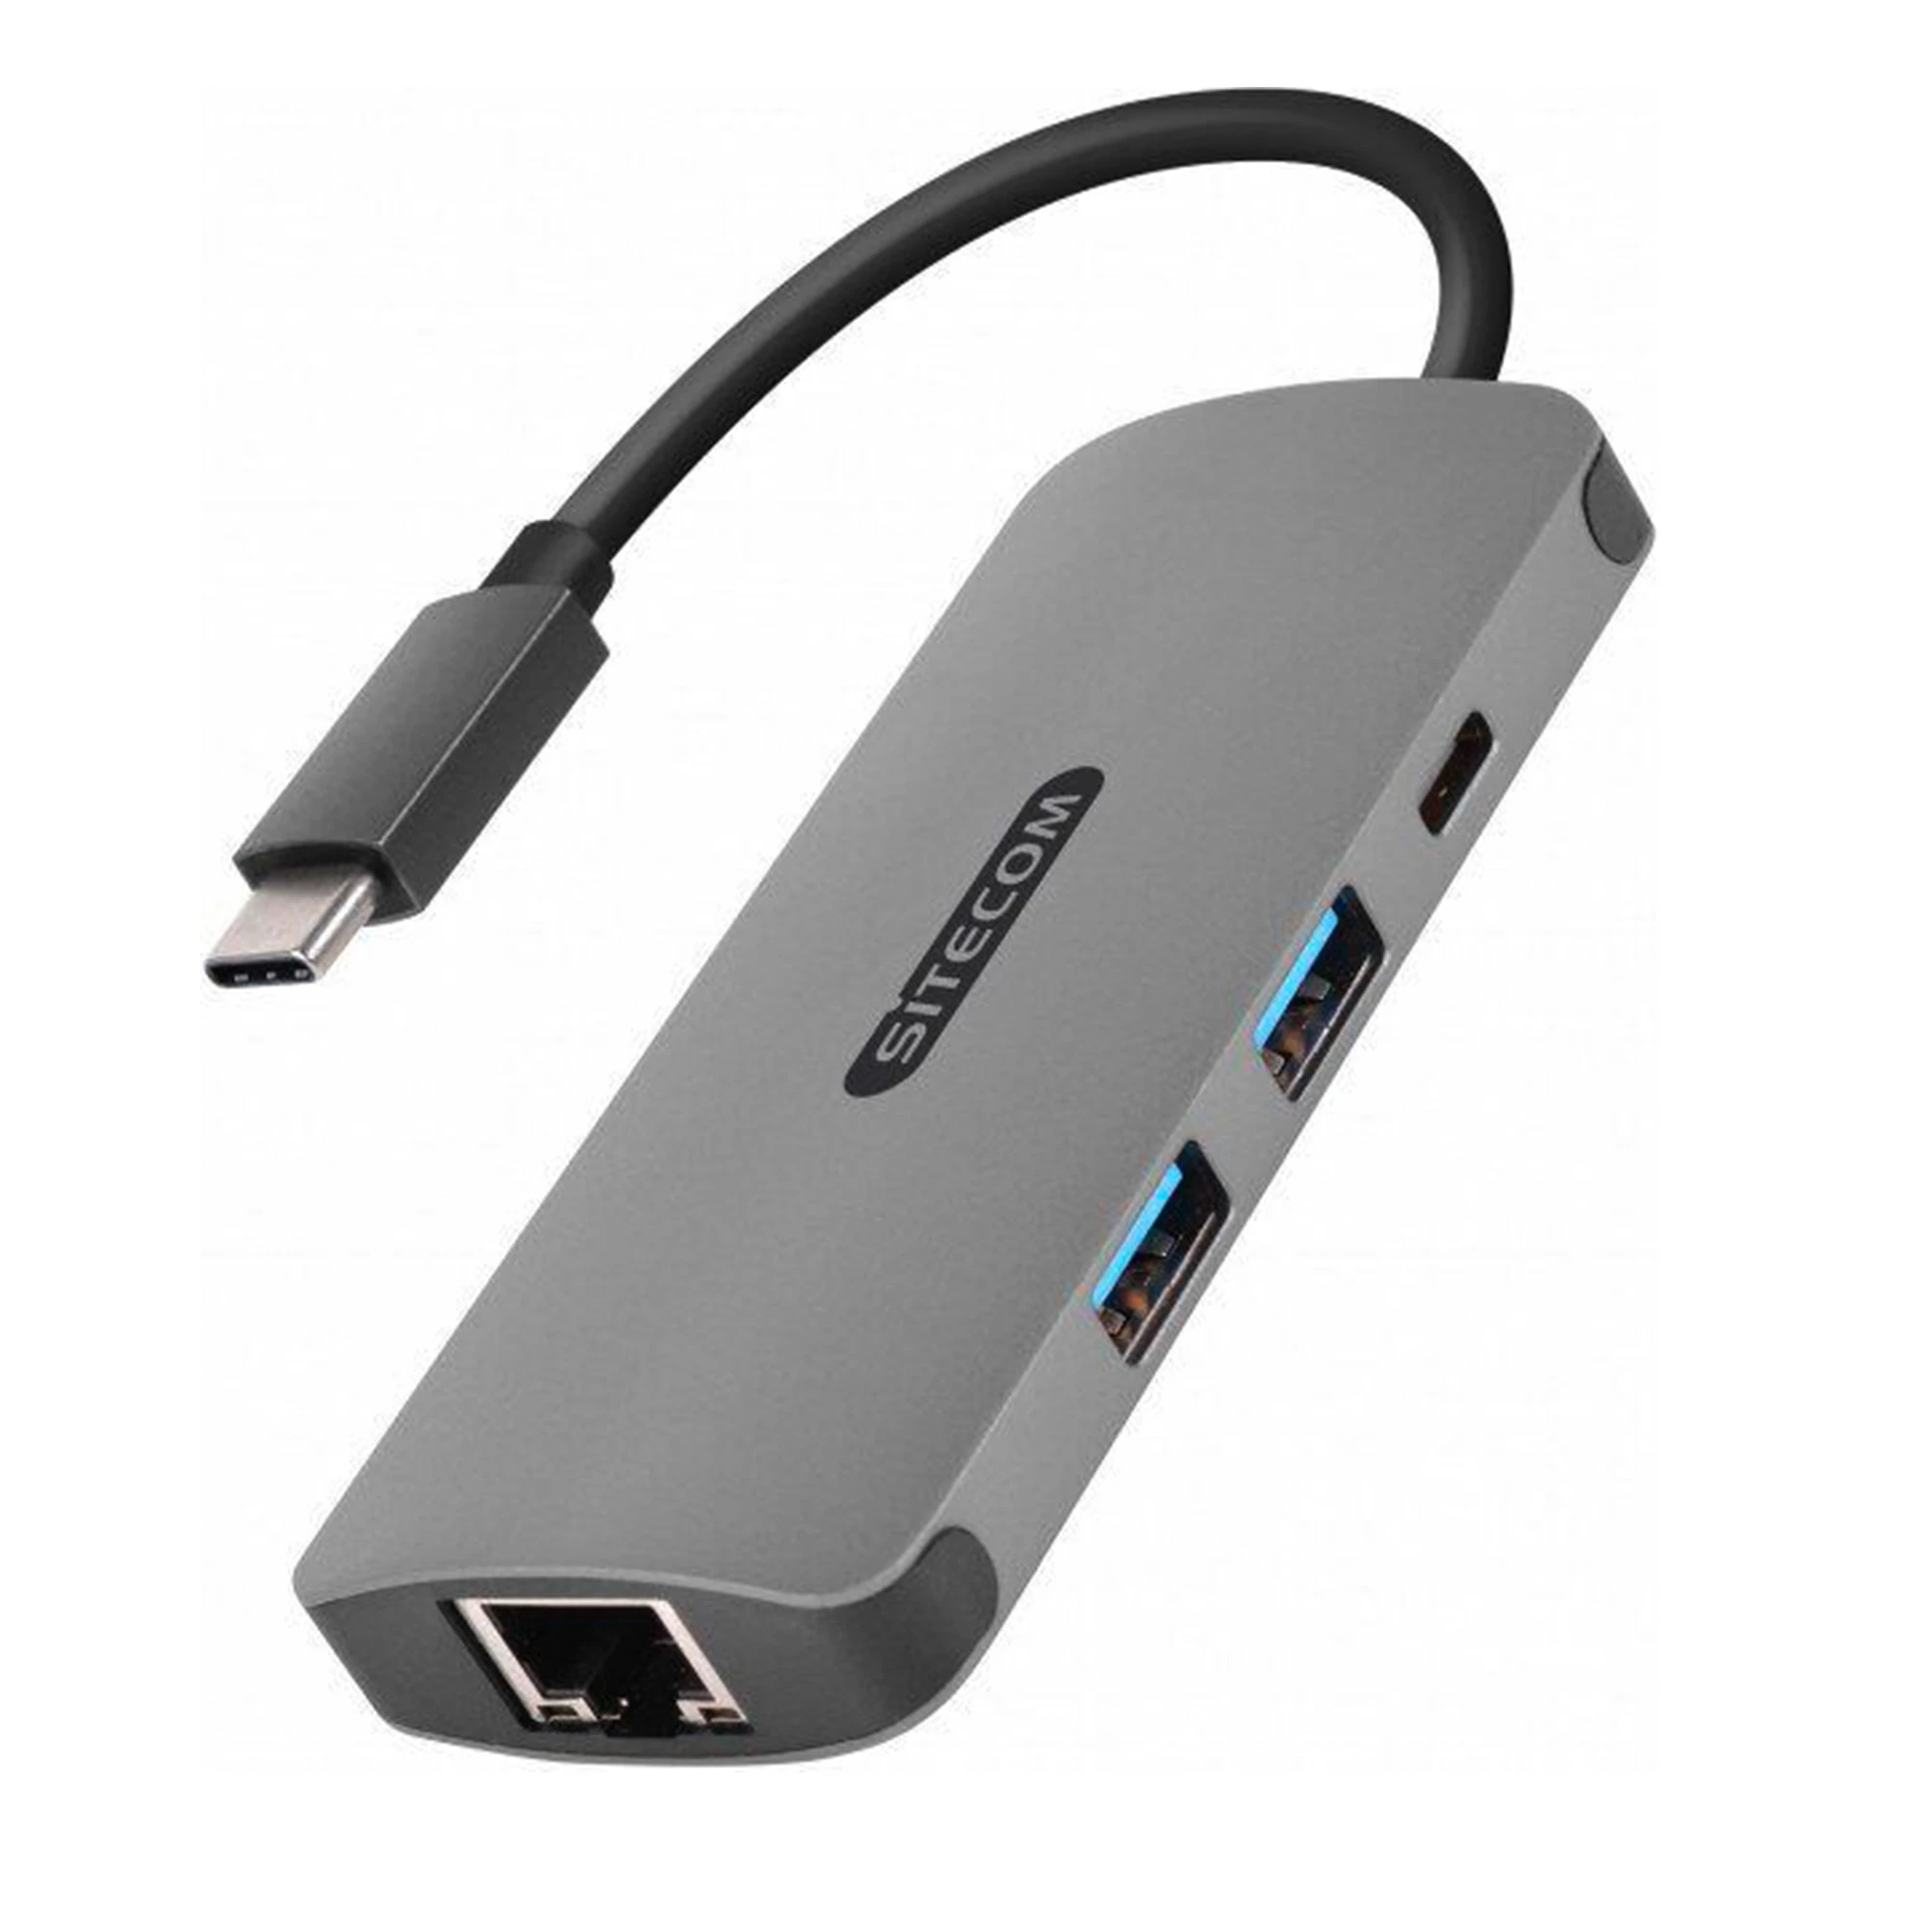 Sitecom USB-C to Gigabit LAN Adapter with USB-C to Power Delivery + 2 USB 3.0 (CN-378)